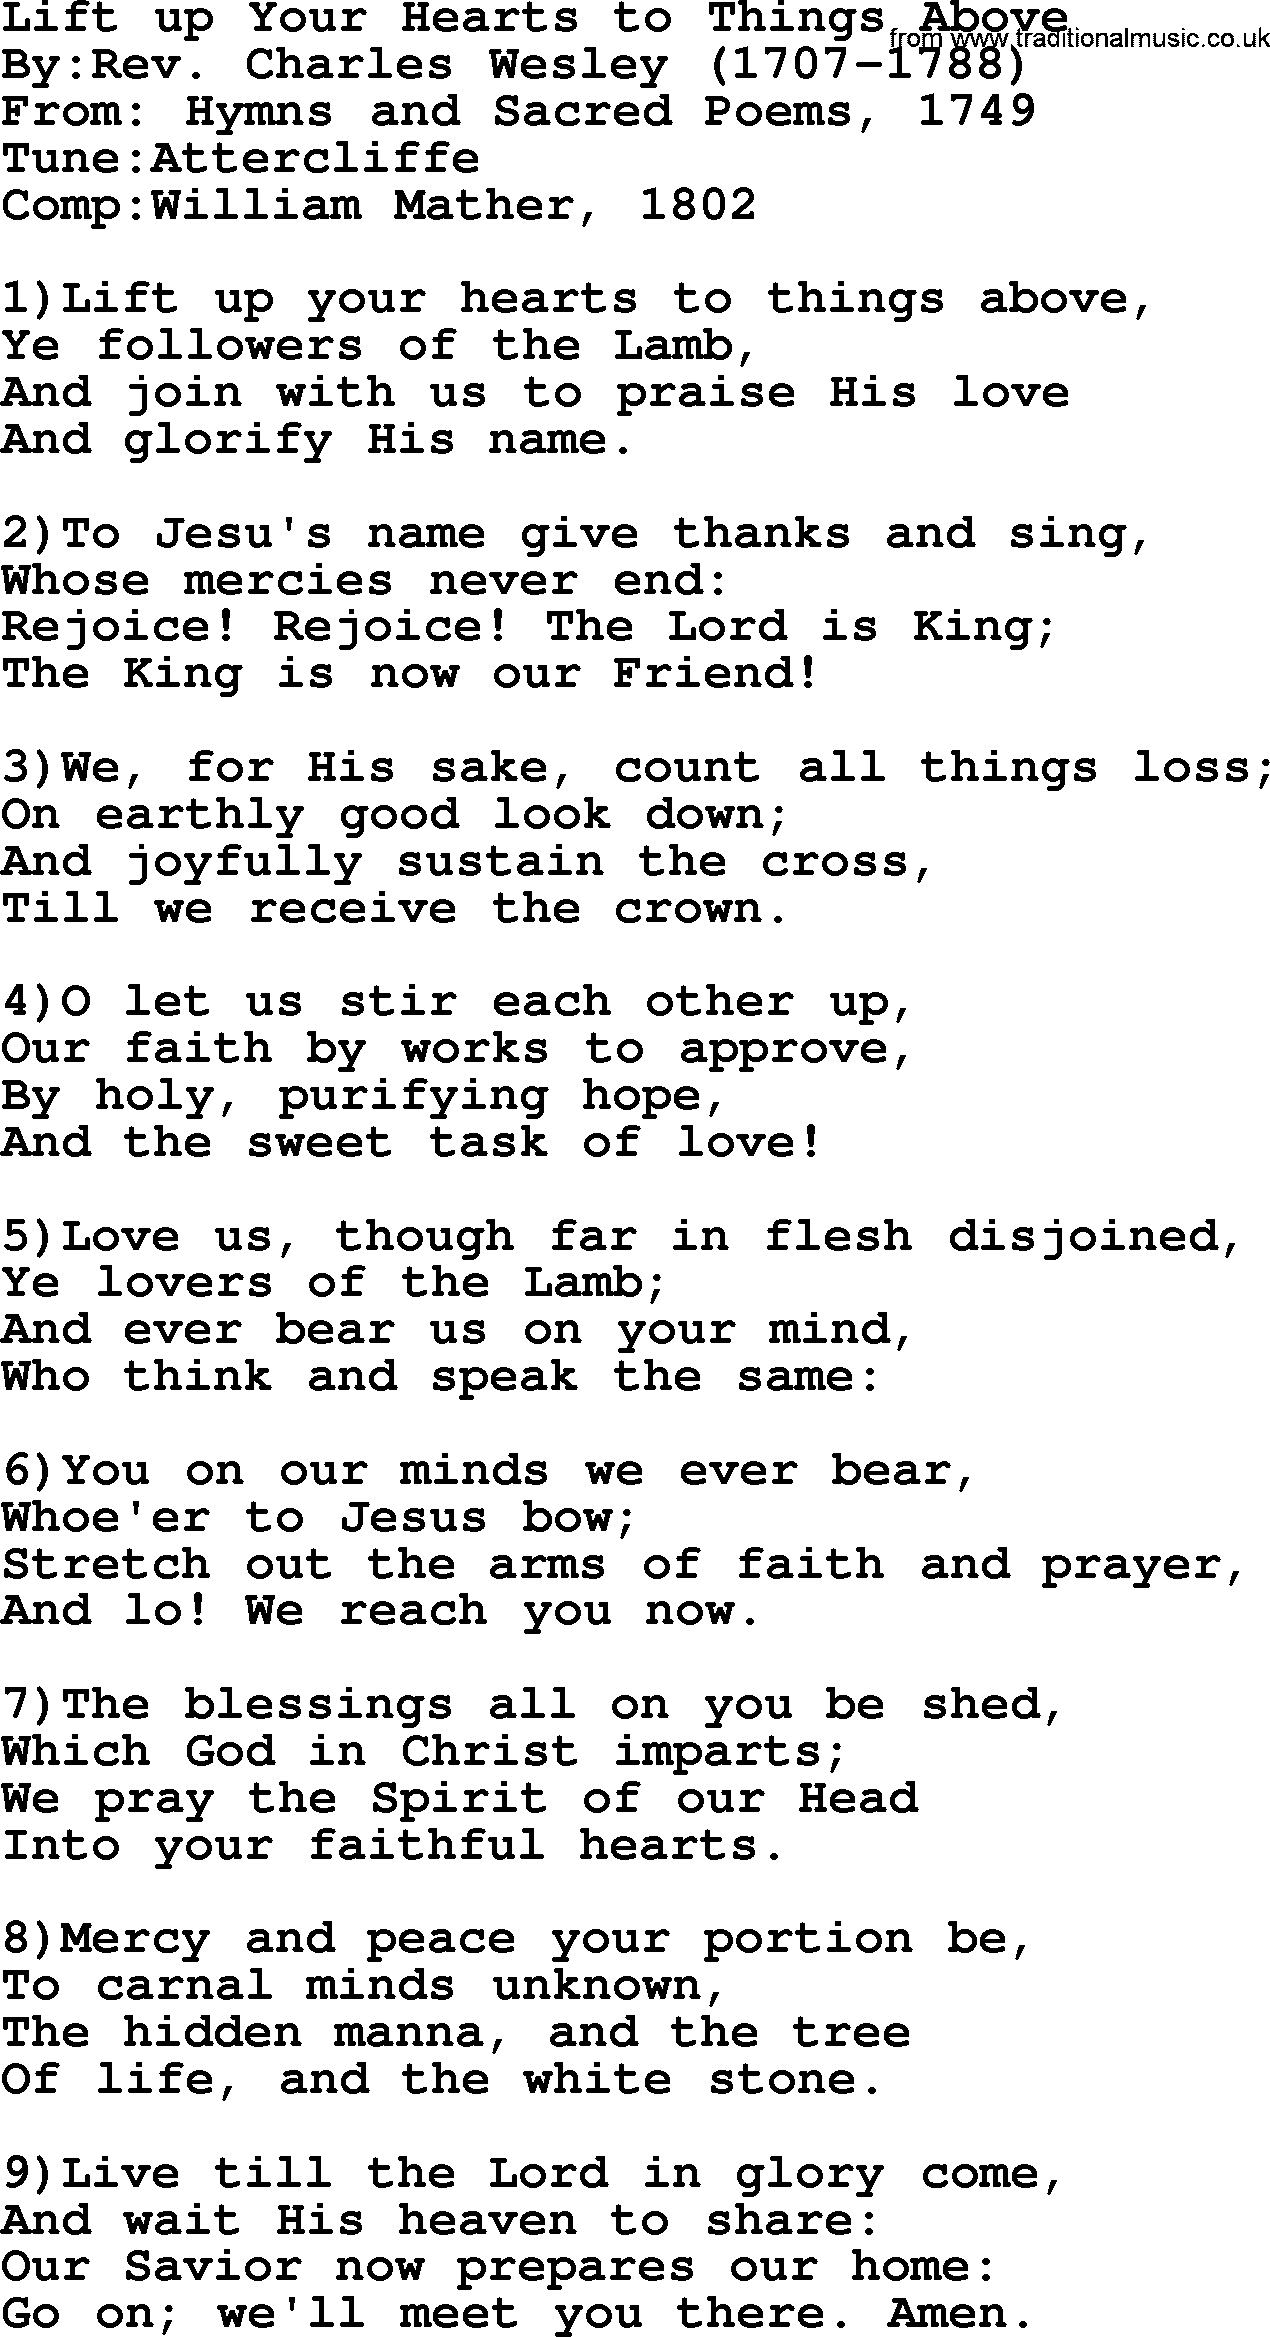 Methodist Hymn: Lift Up Your Hearts To Things Above, lyrics